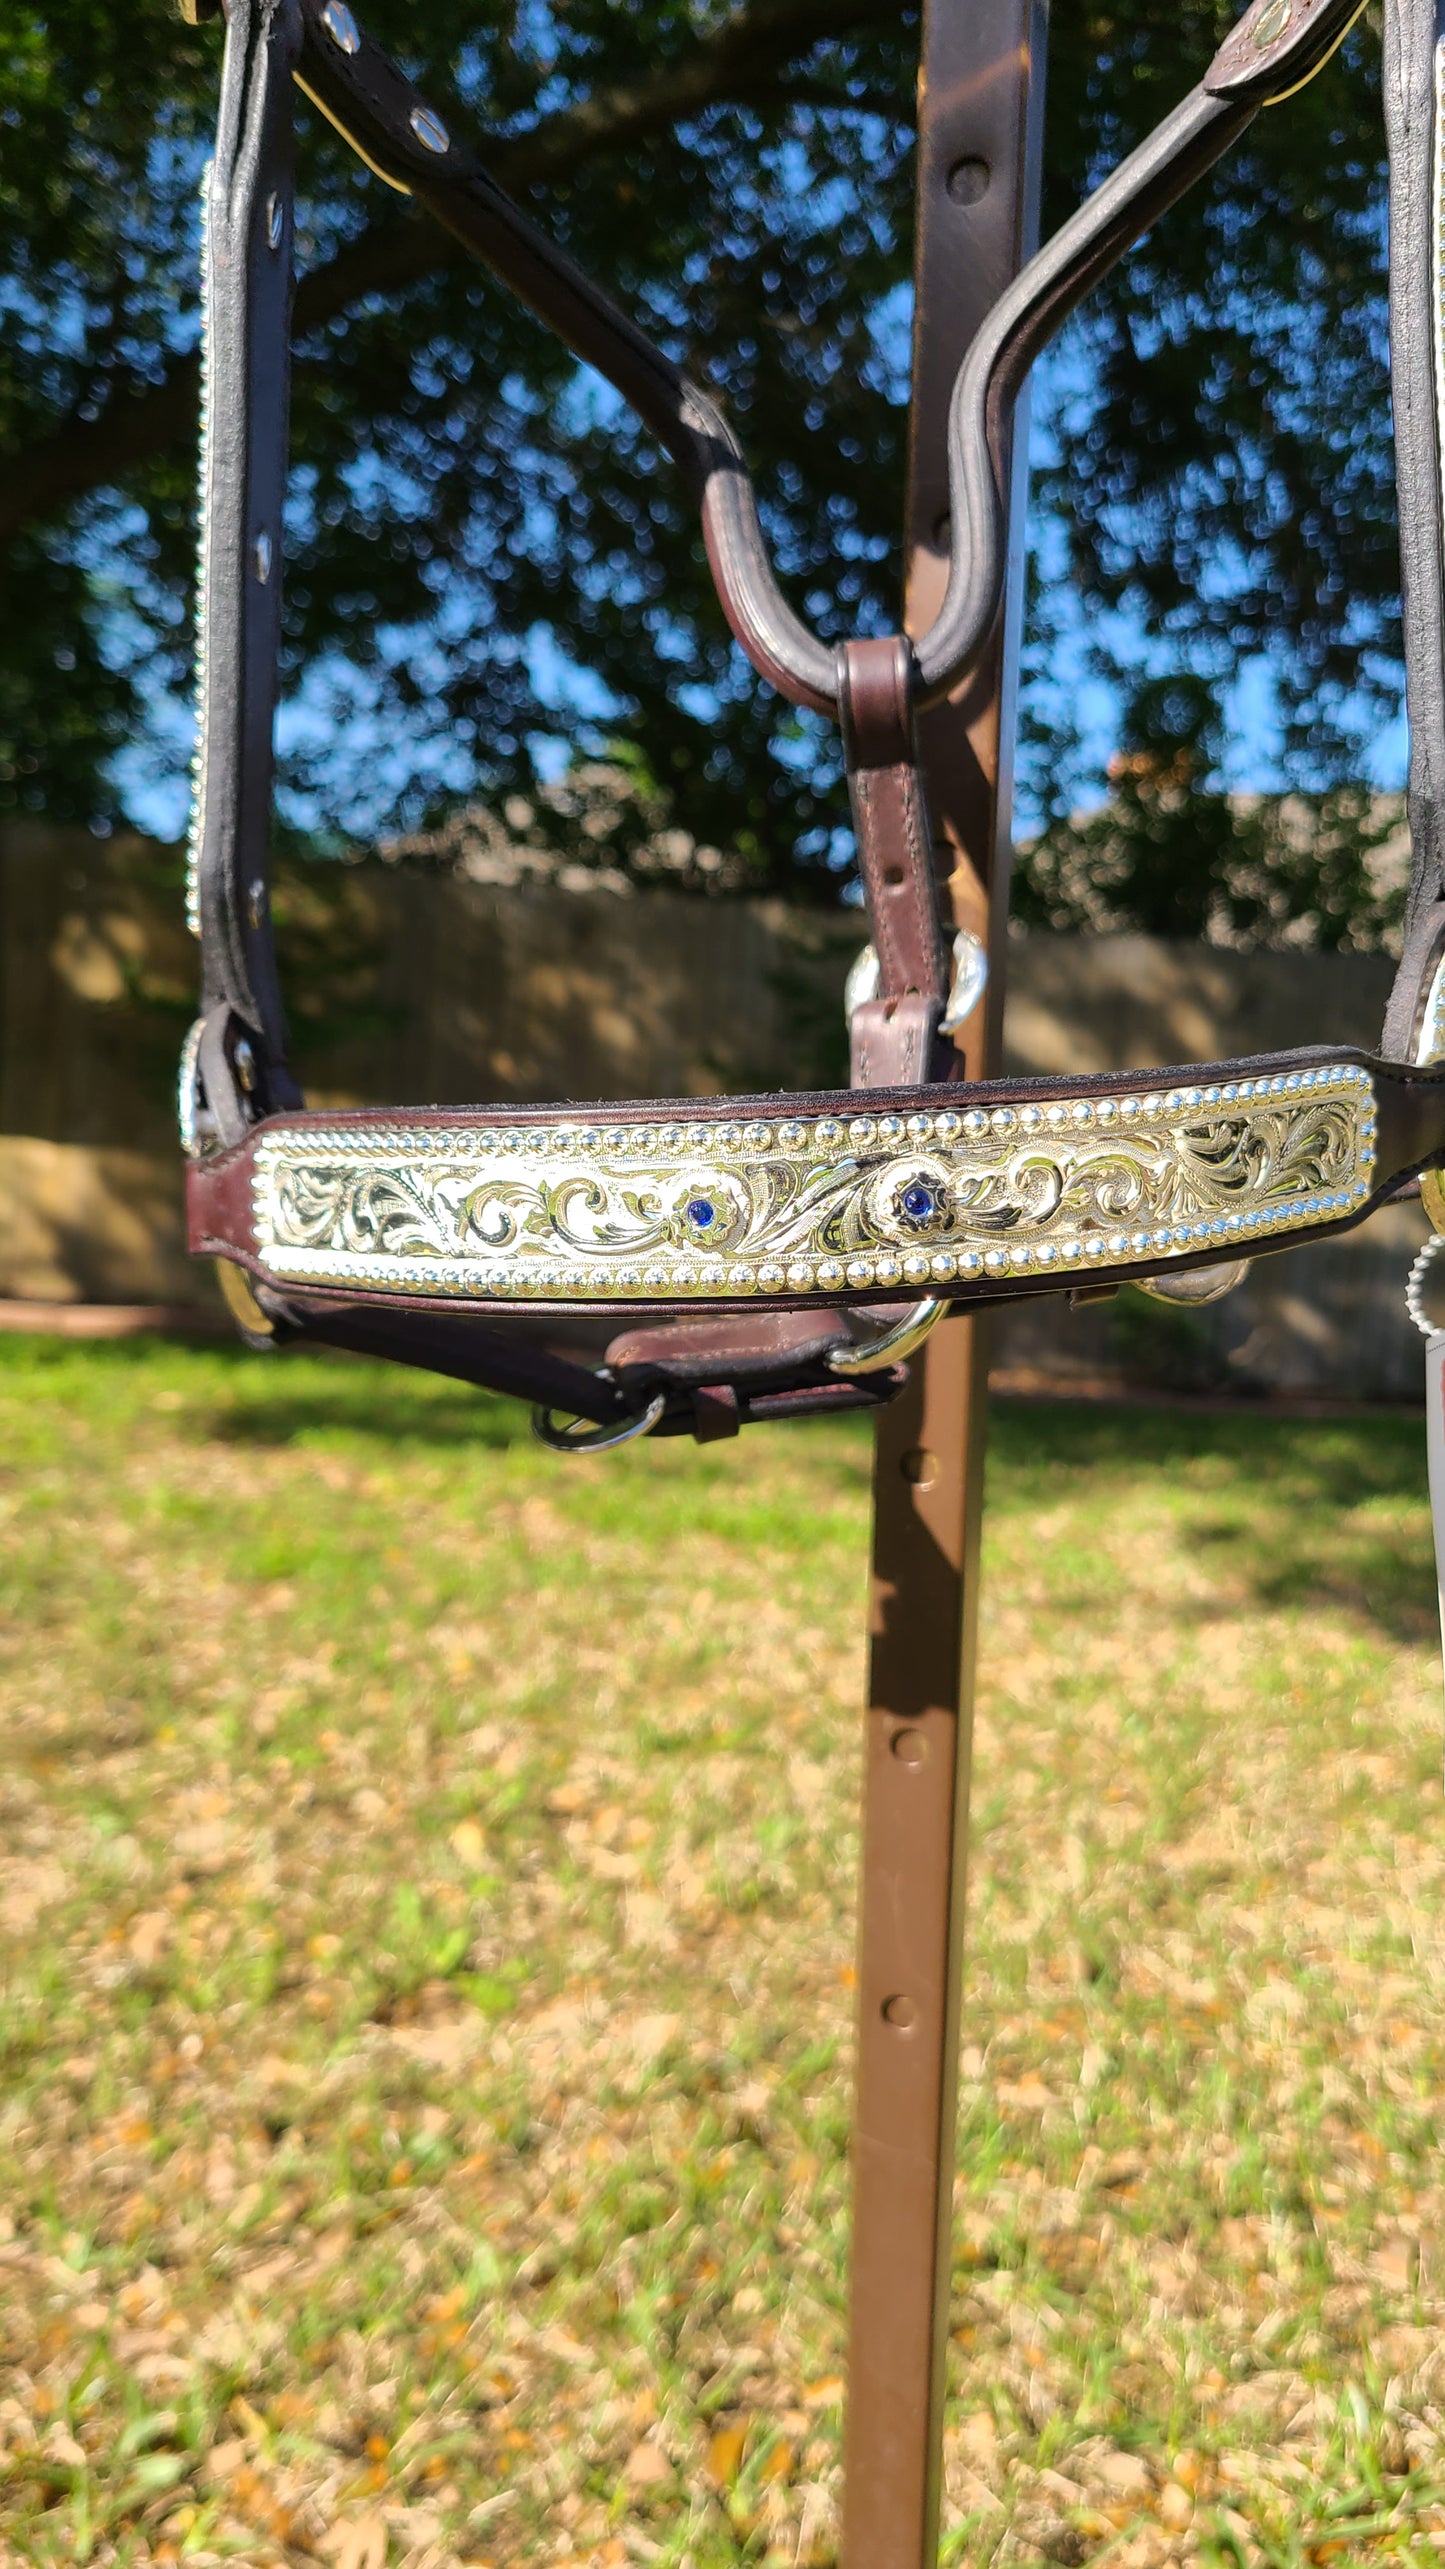 Horse Sized Show Halter with blue stones